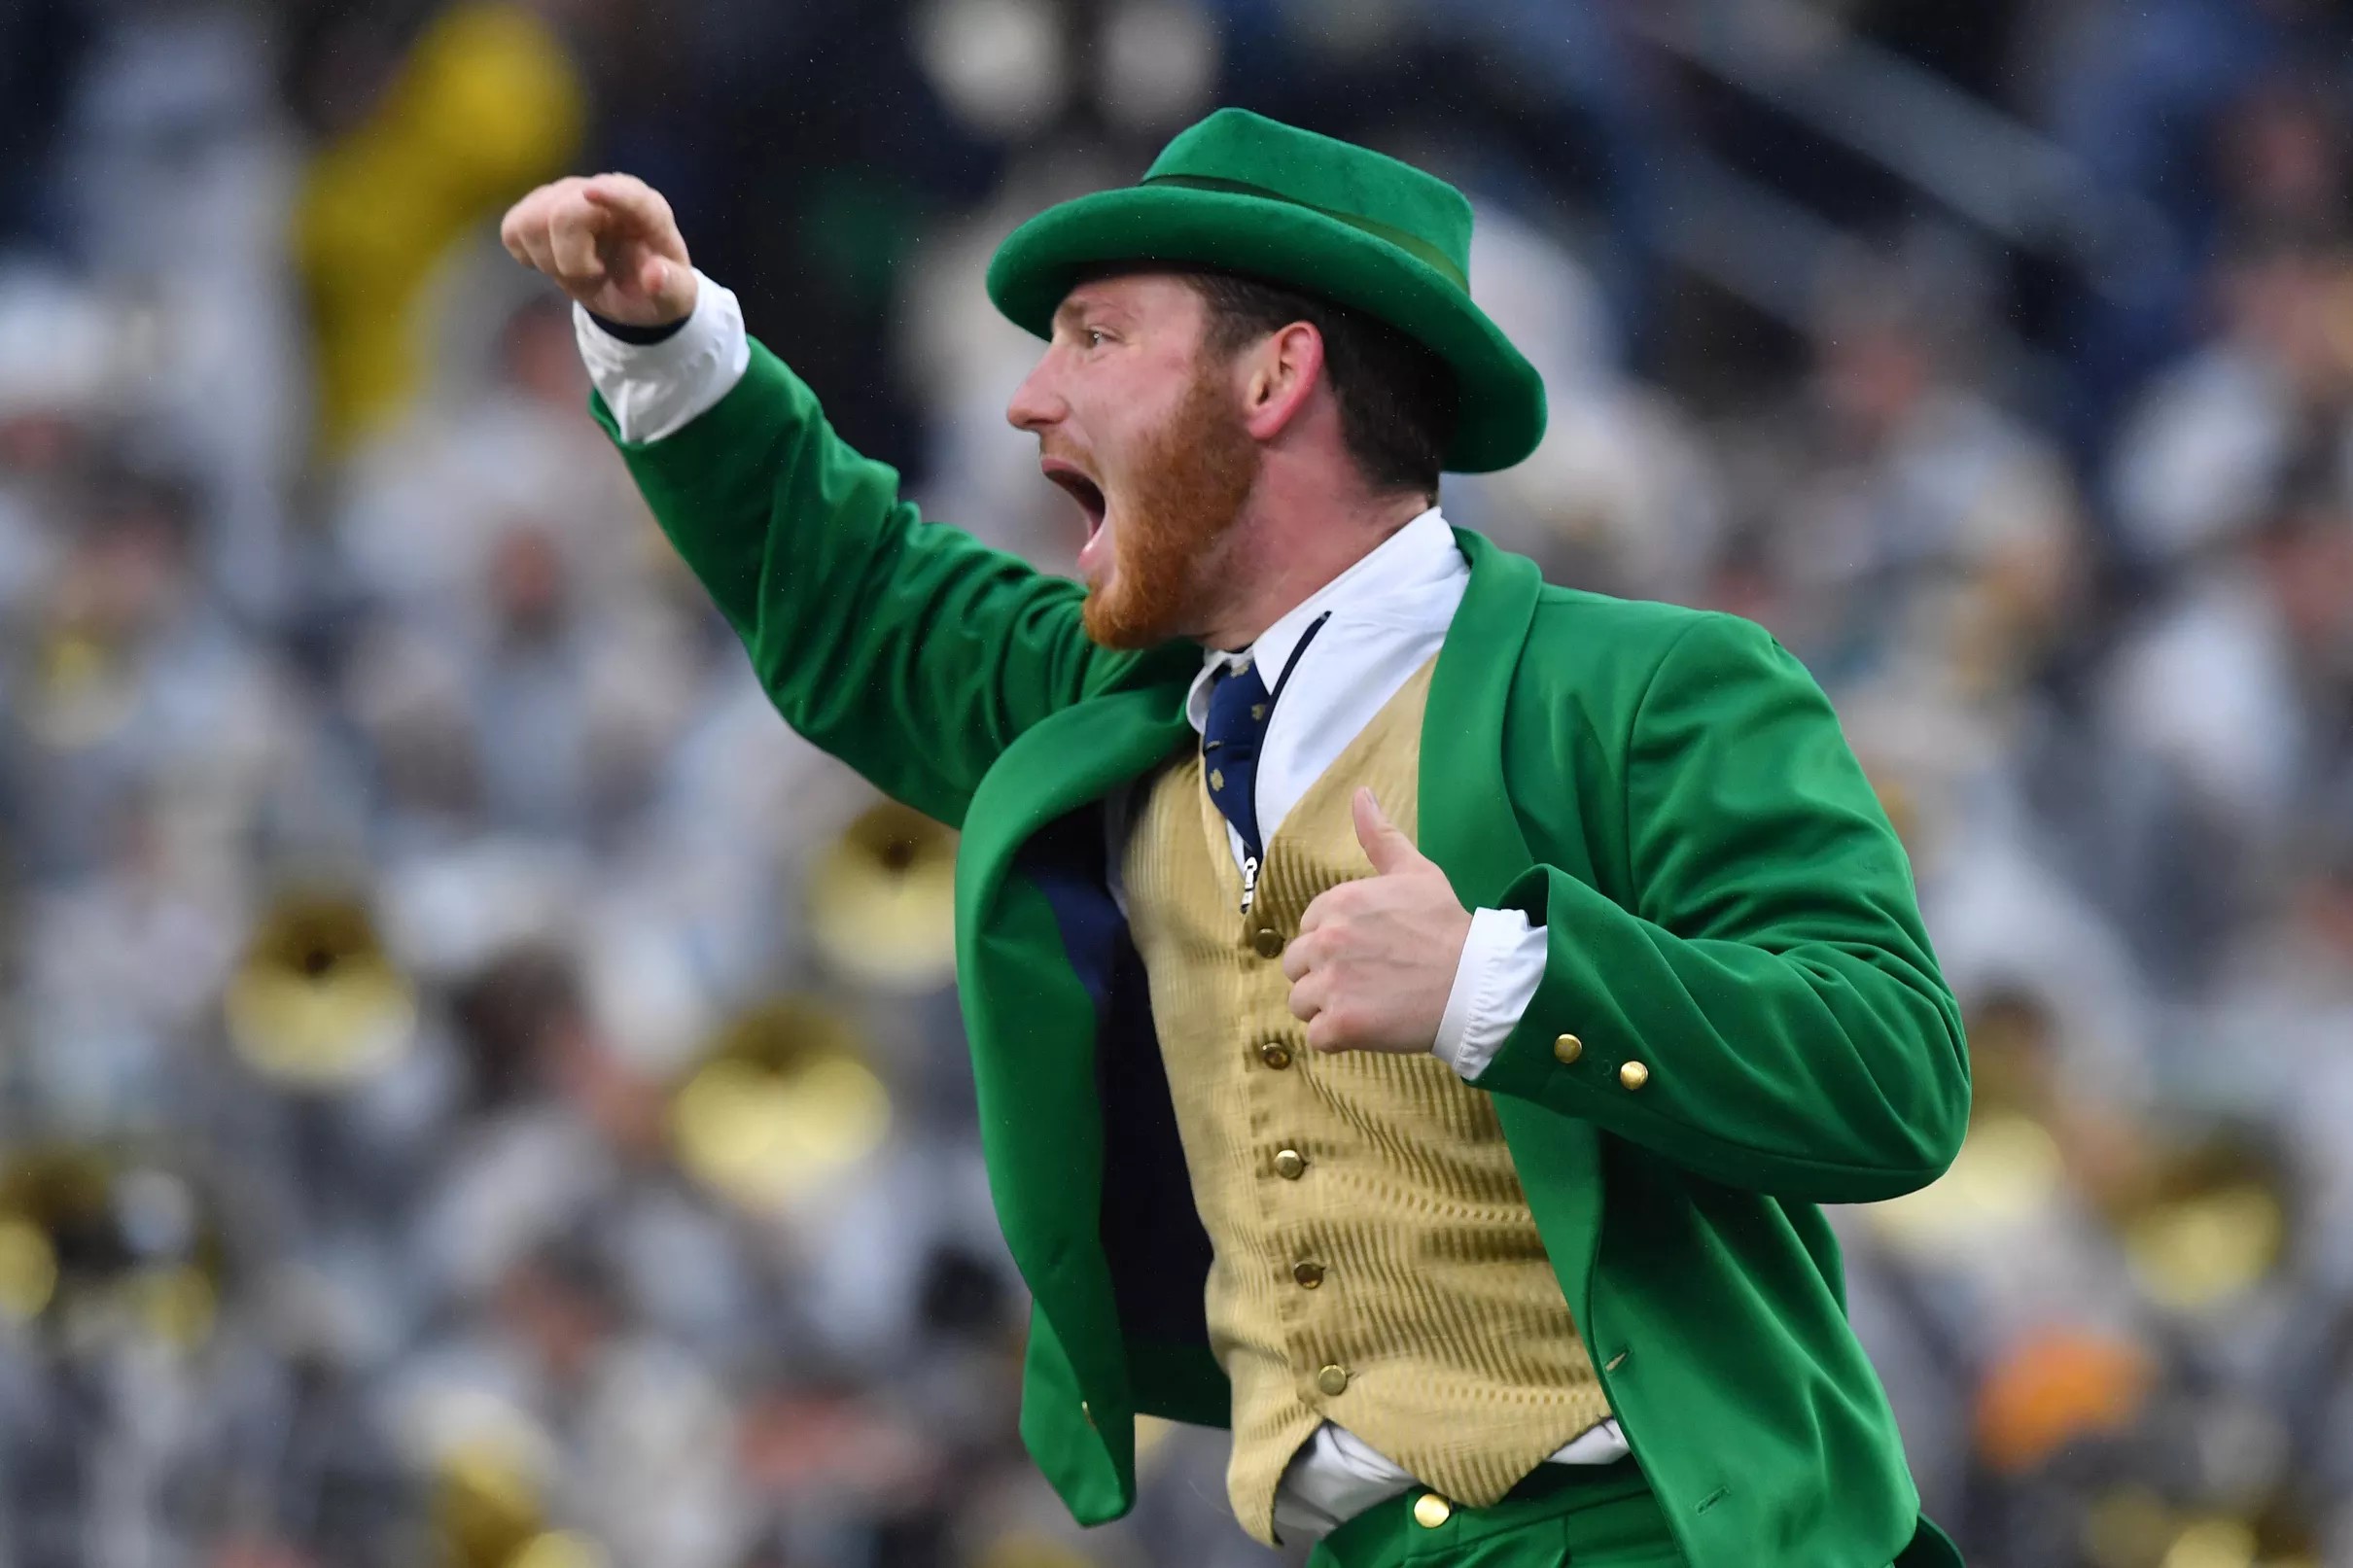 It’s Time for Notre Dame to Ditch the Leprechaun and Bring Back